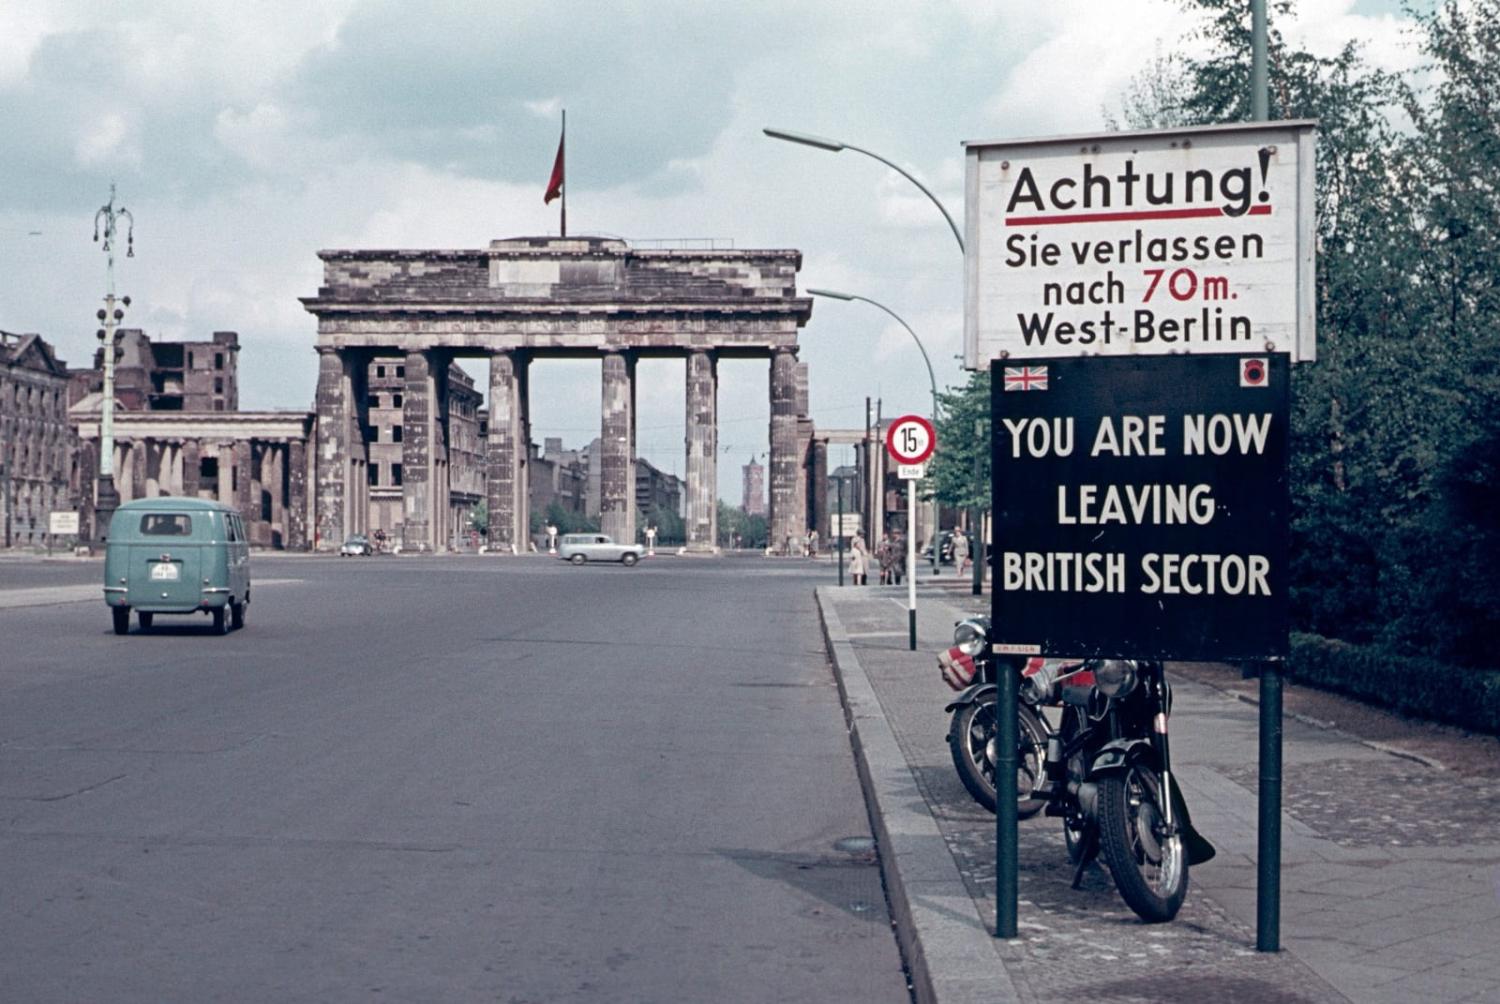 At the Brandenburg Gate in West Berlin, Germany, 1958 (Getty Images)